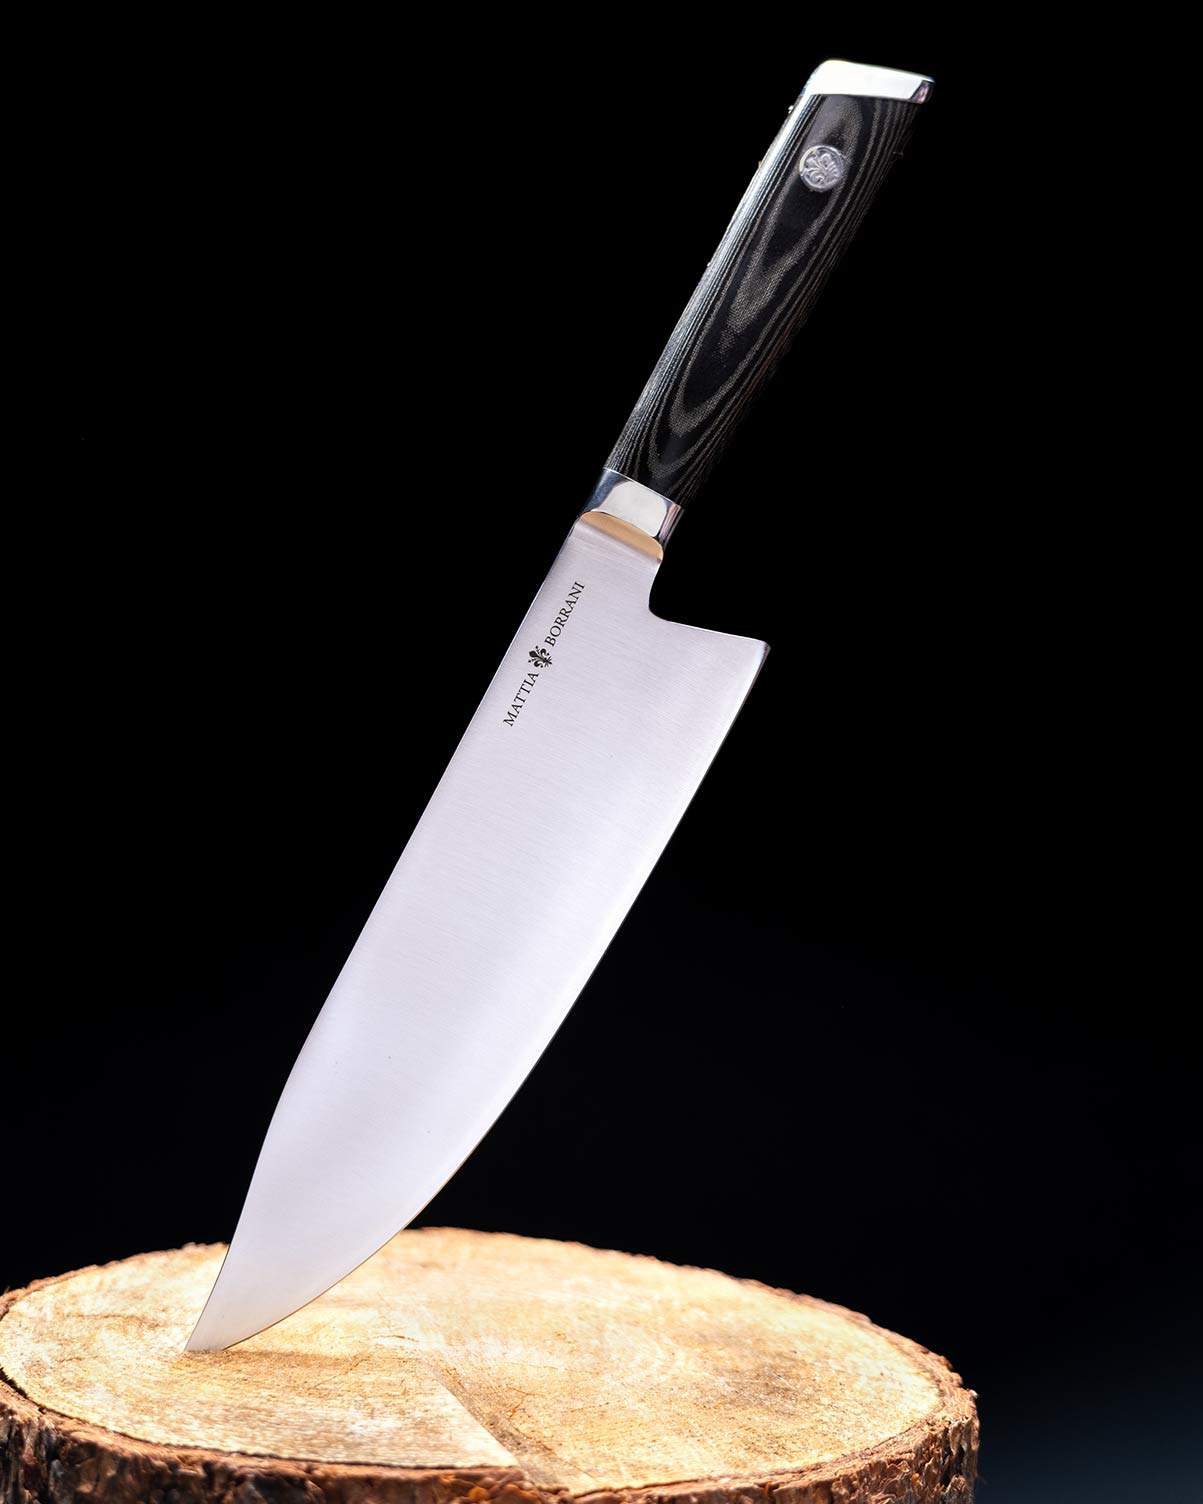 The Mattia Borrani chef knife is a true American style chef knife. It is shown here sticking out of a treestump in front of a dark background.